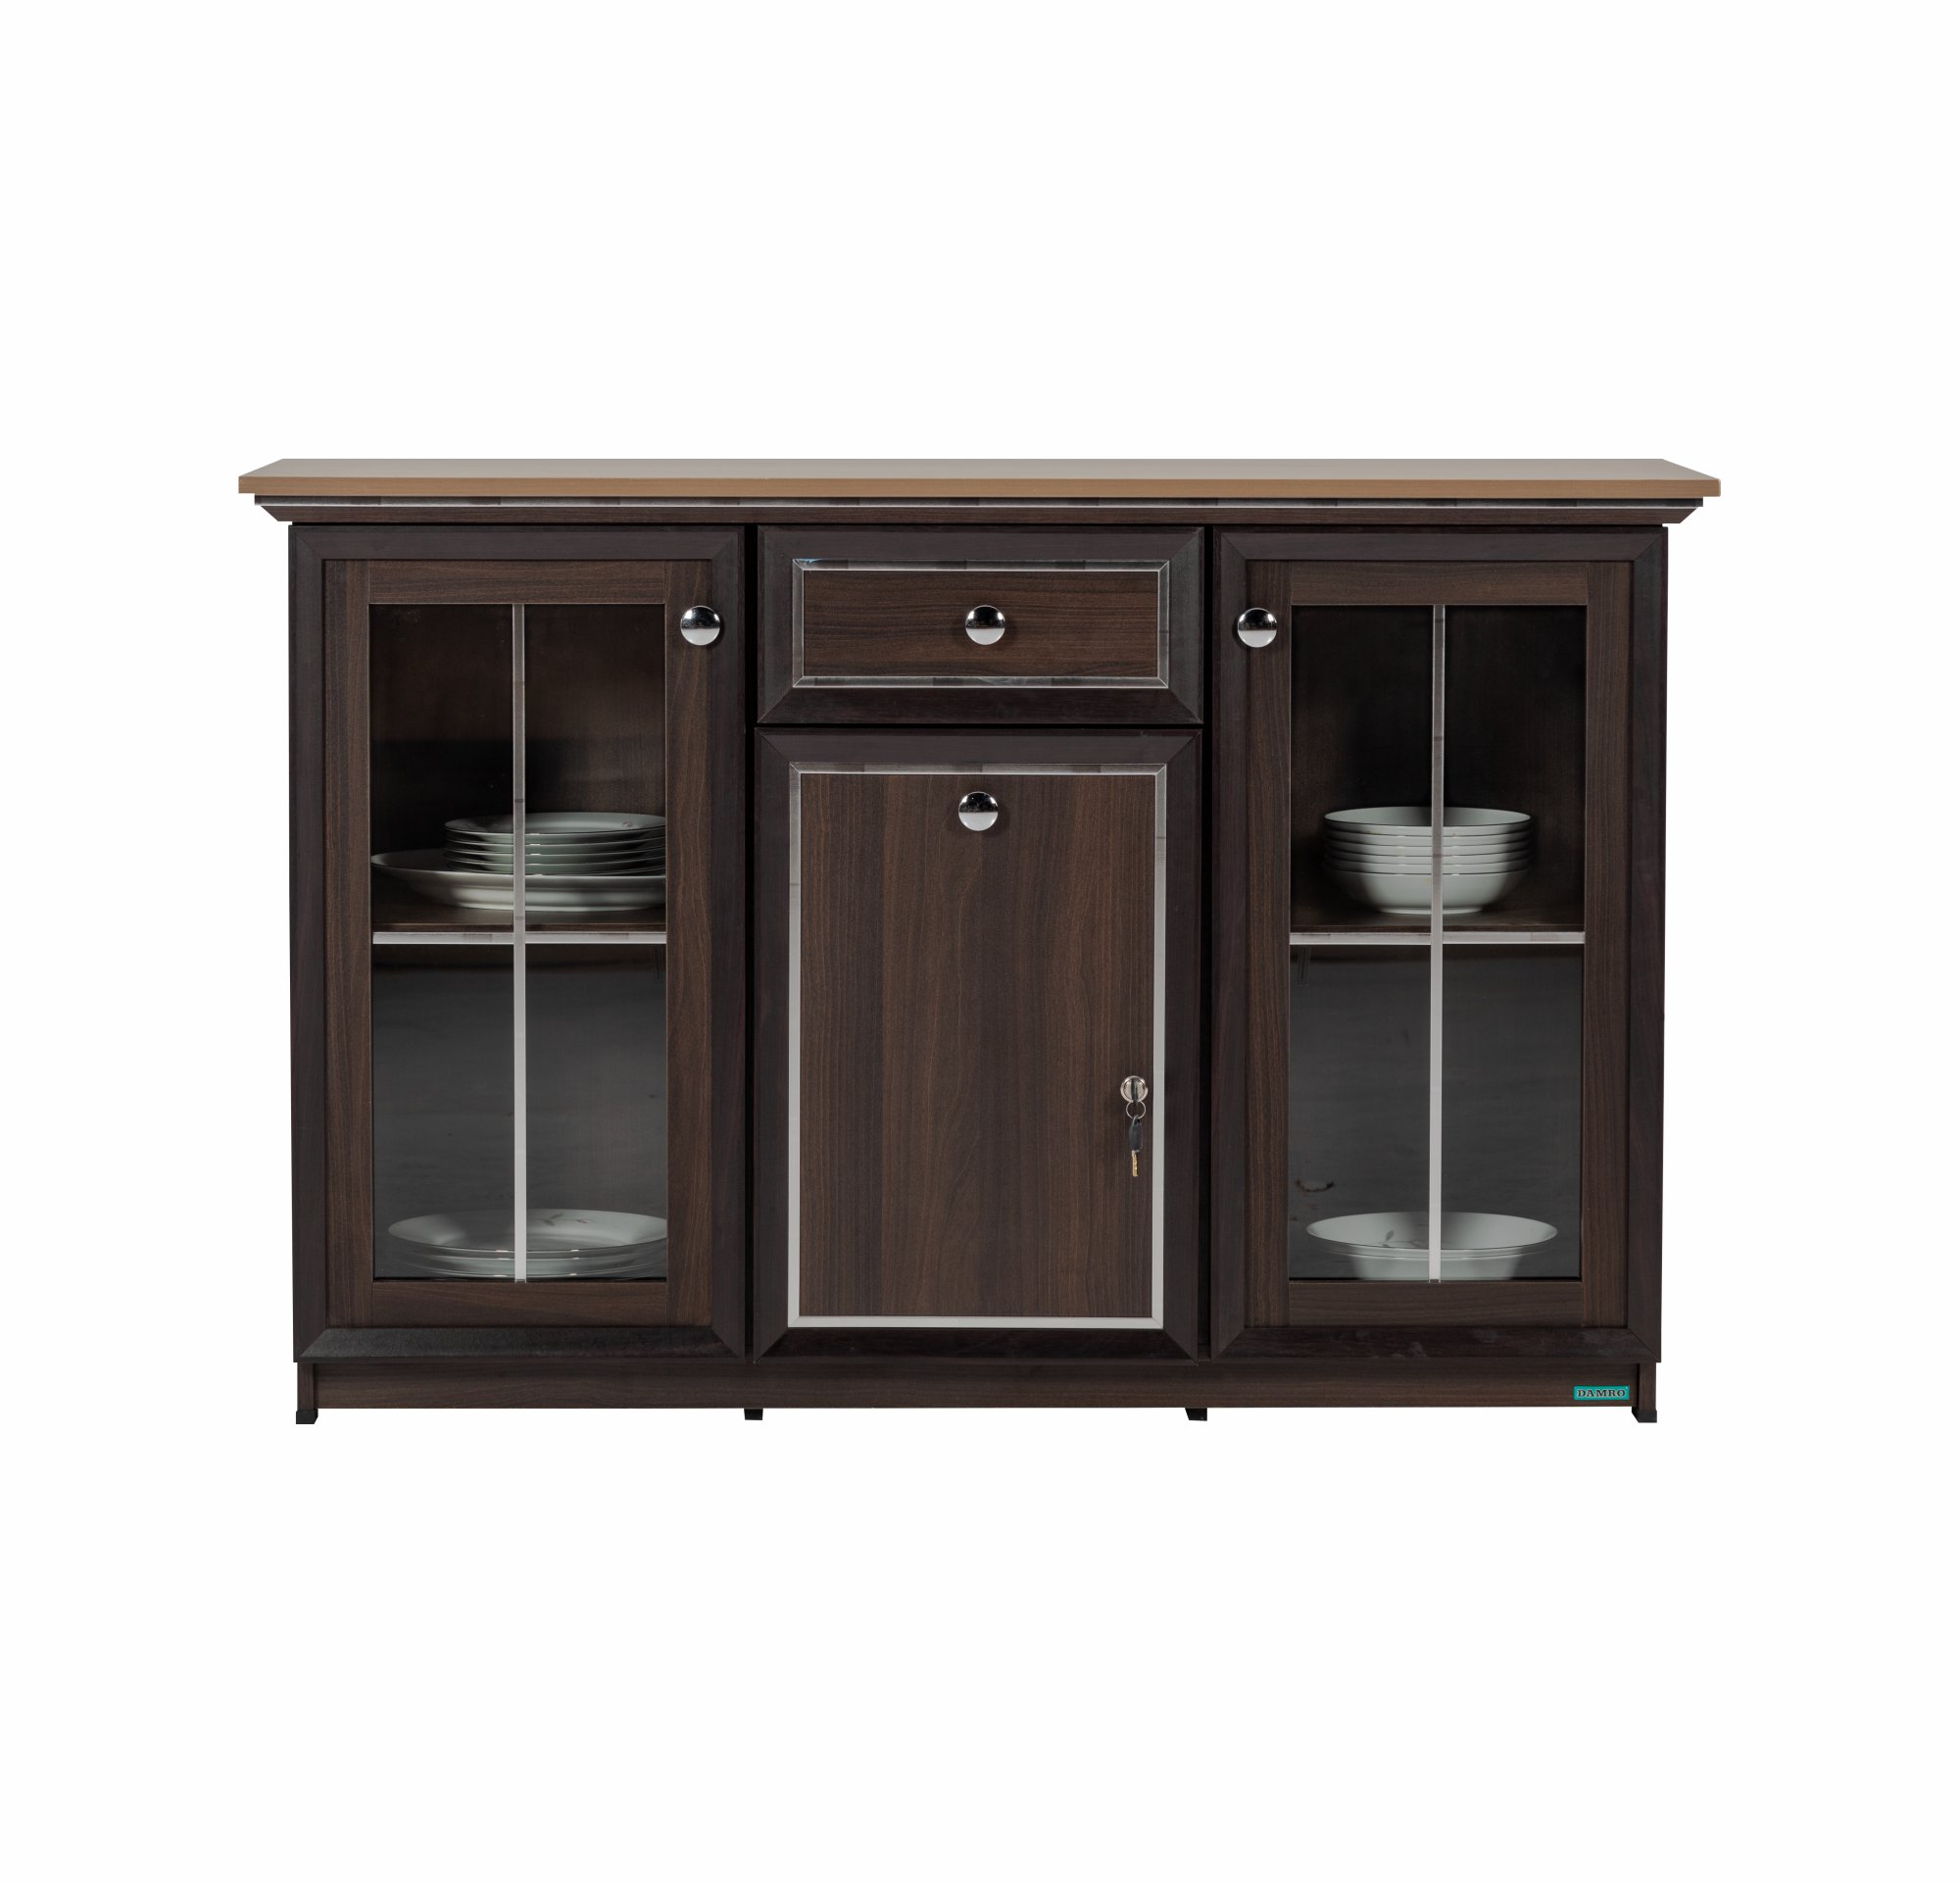 KDC008-Dining Cabinet With 1 Drawers-M42/M51